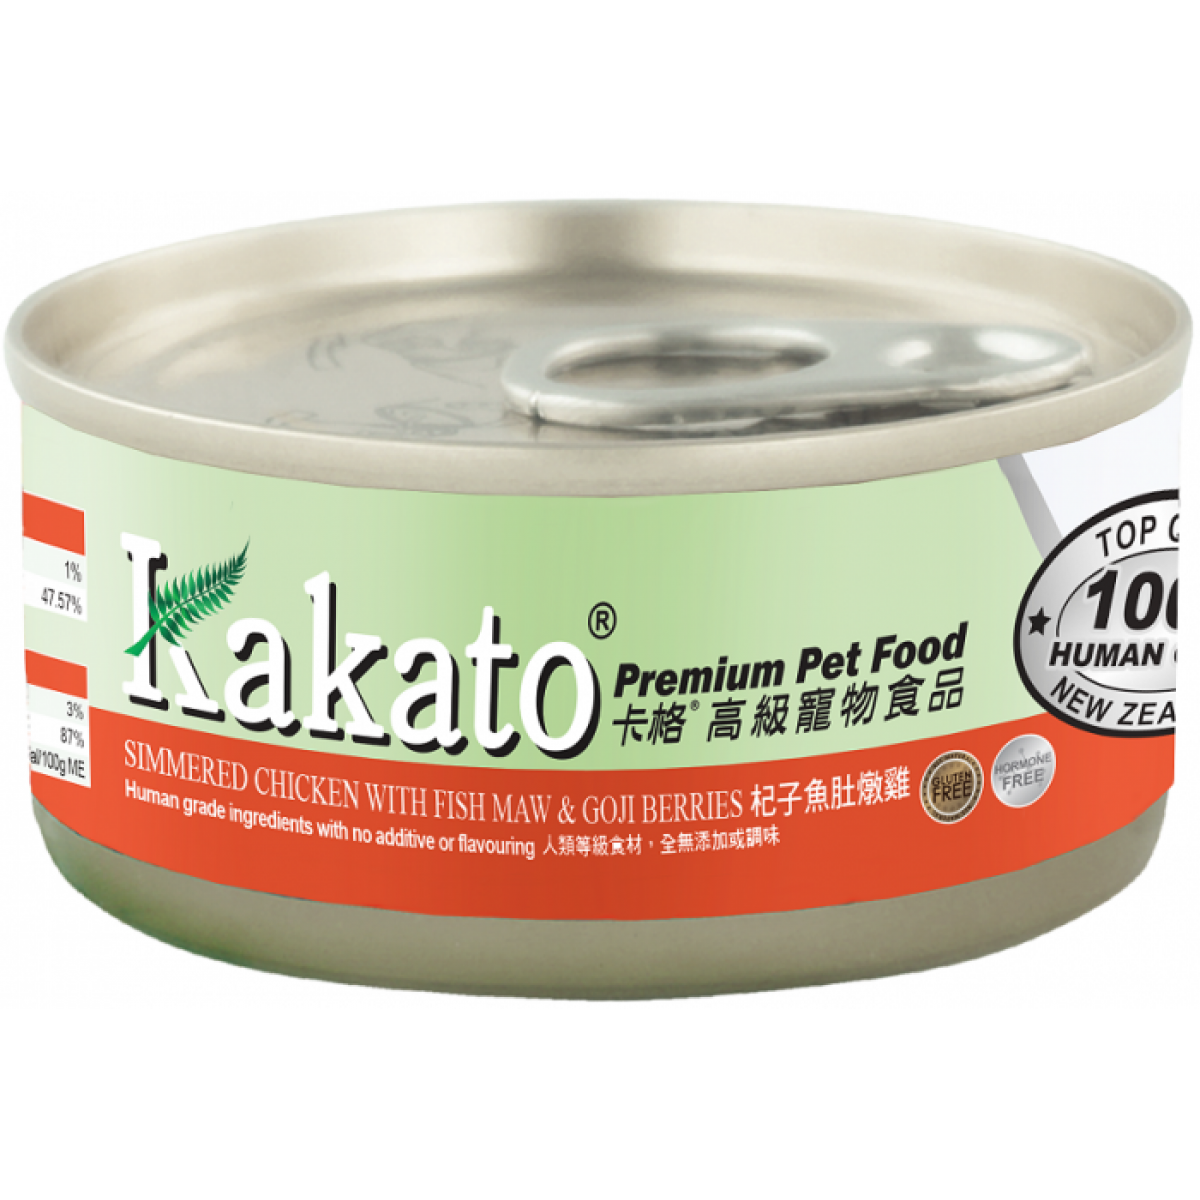 Kakato - Simmered Chicken with Fish Maw & Goji Berries (Dogs & Cats) canned 70g